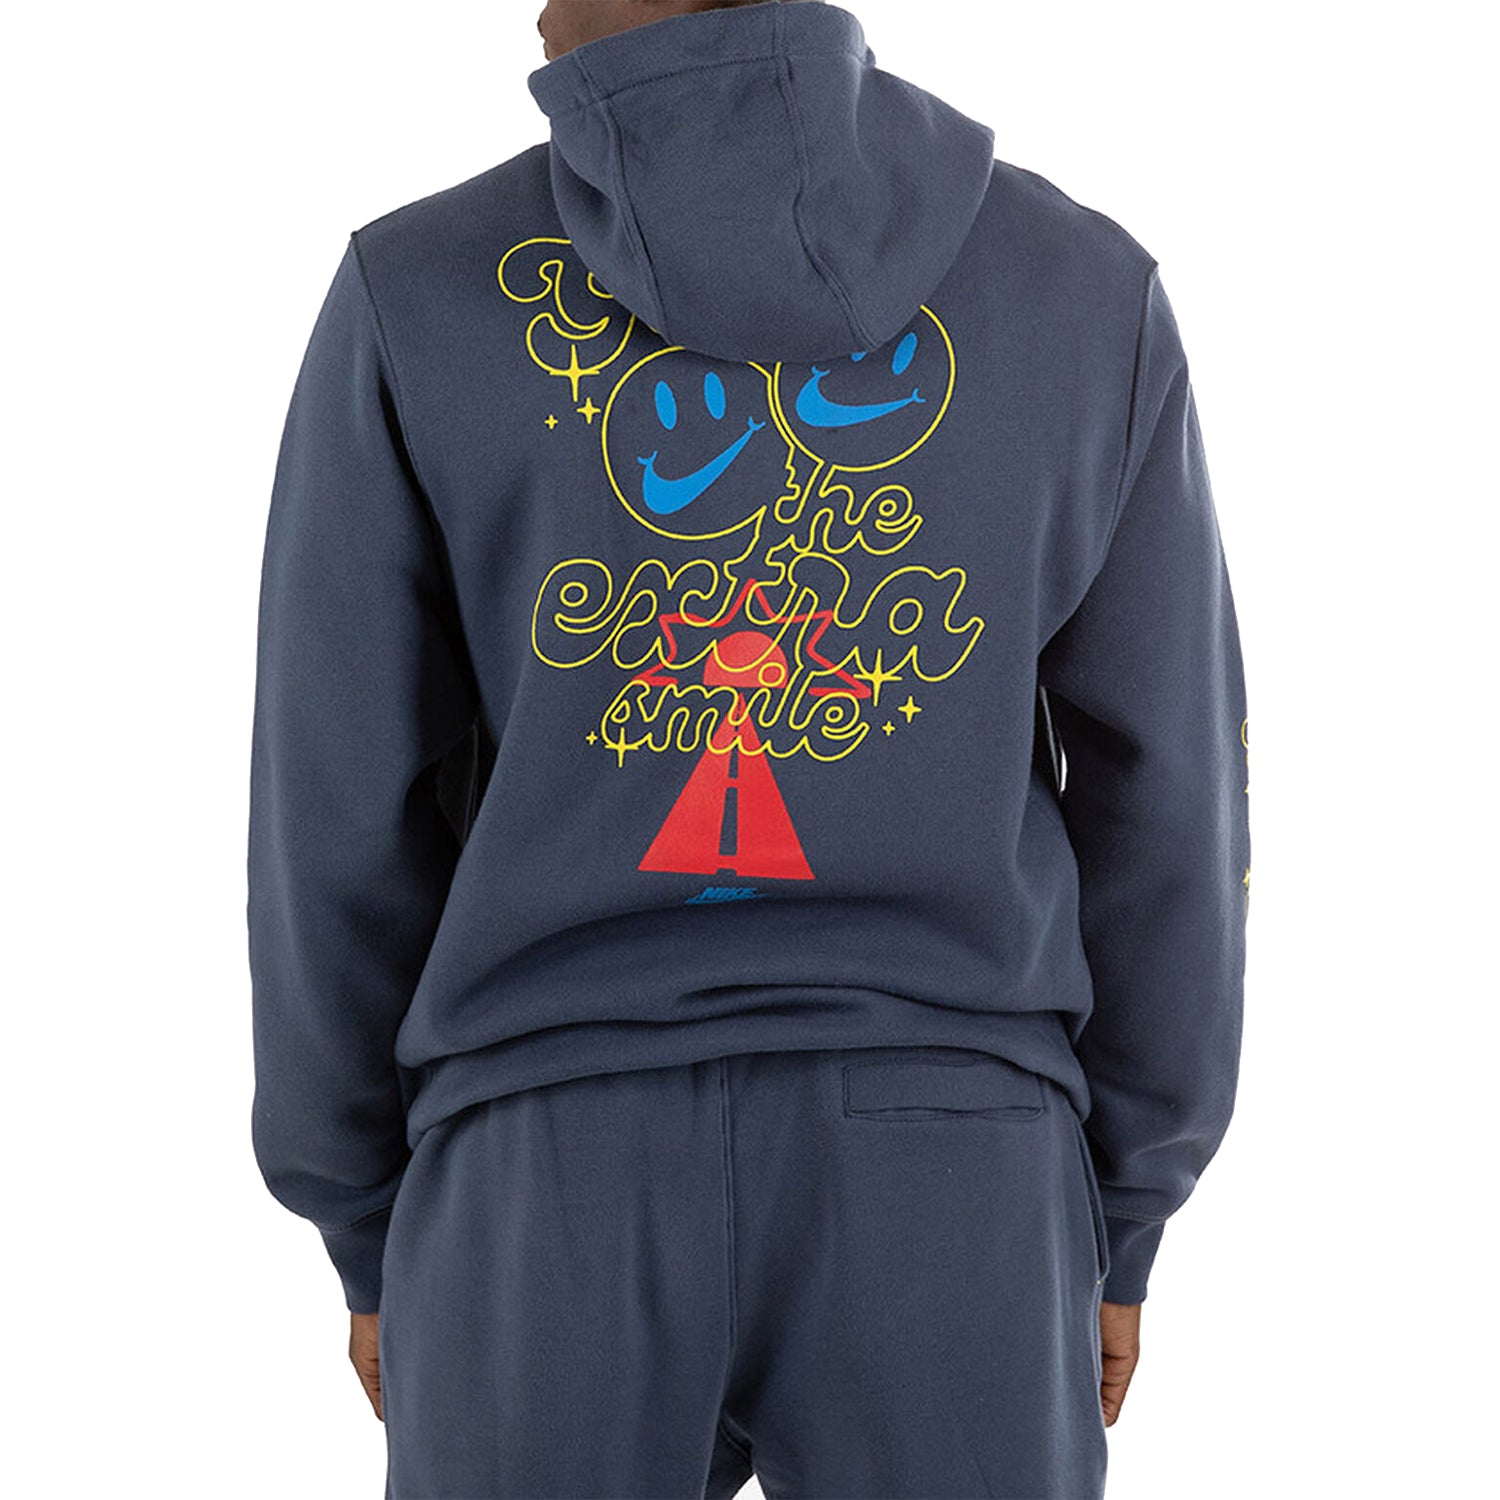 Nike Nsw Club Fleece Smile Pullover Hoodie Mens Style : Dq3520